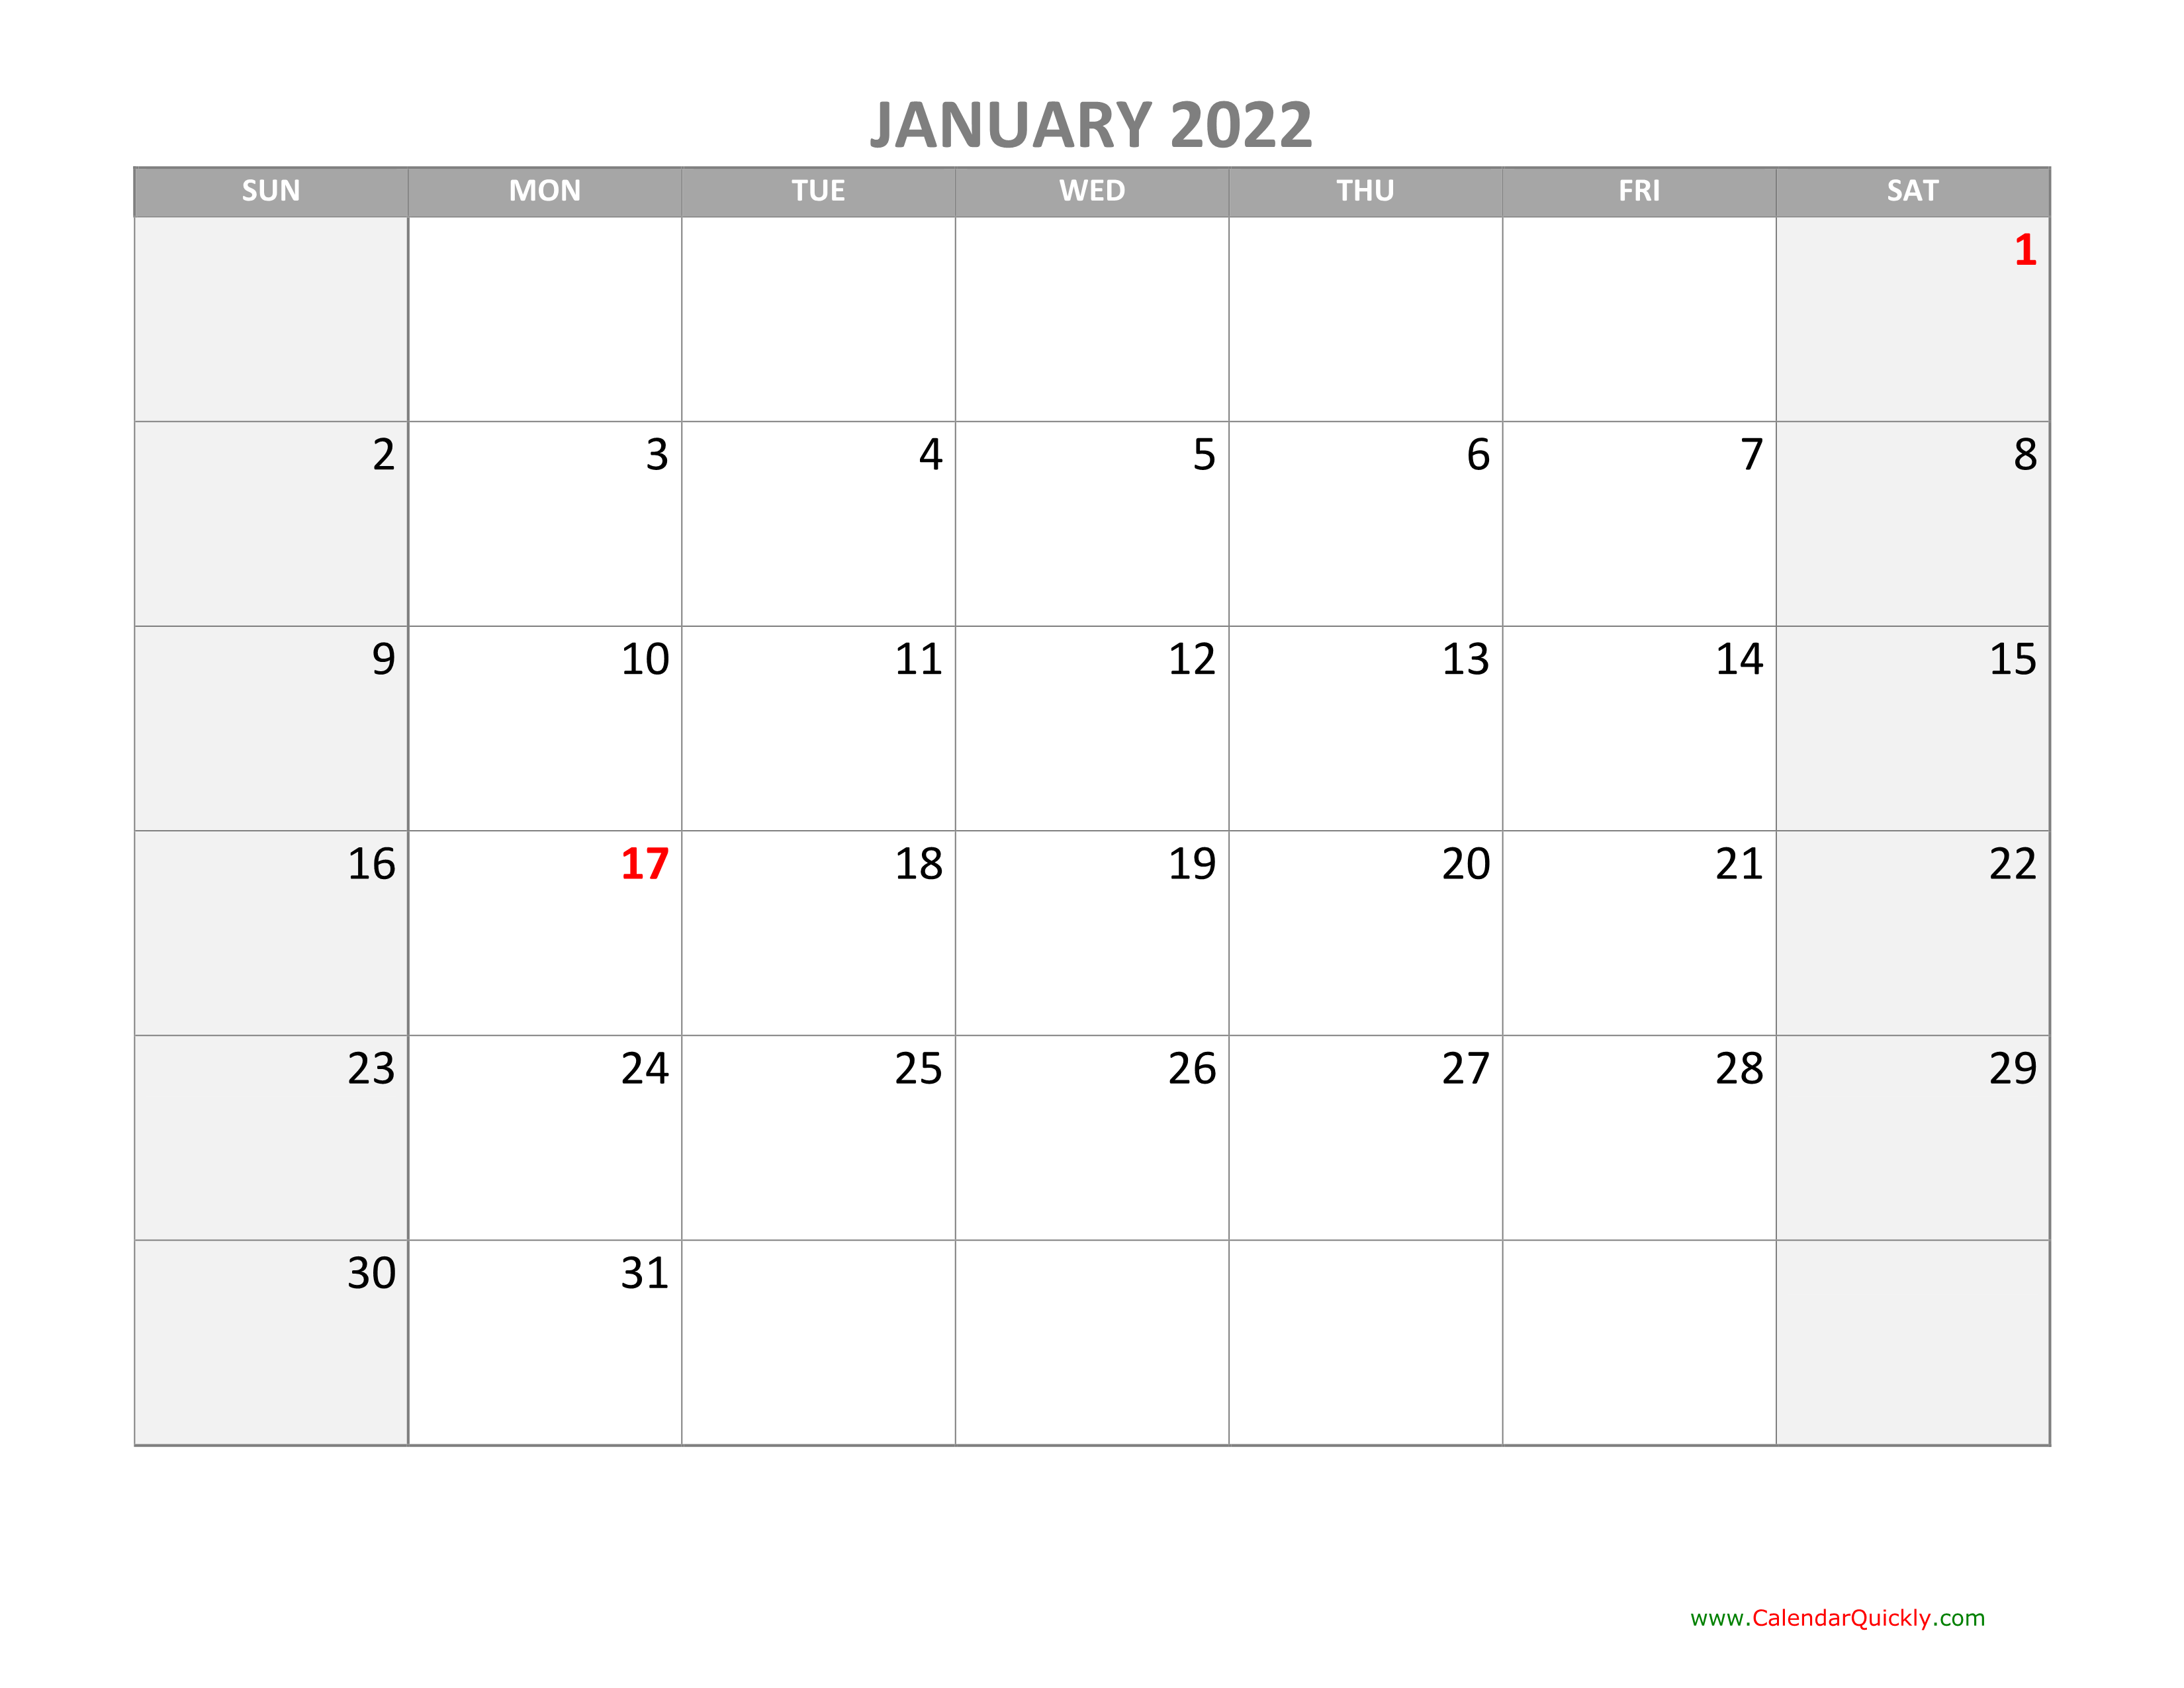 monthly-calendar-2022-with-holidays-calendar-quickly